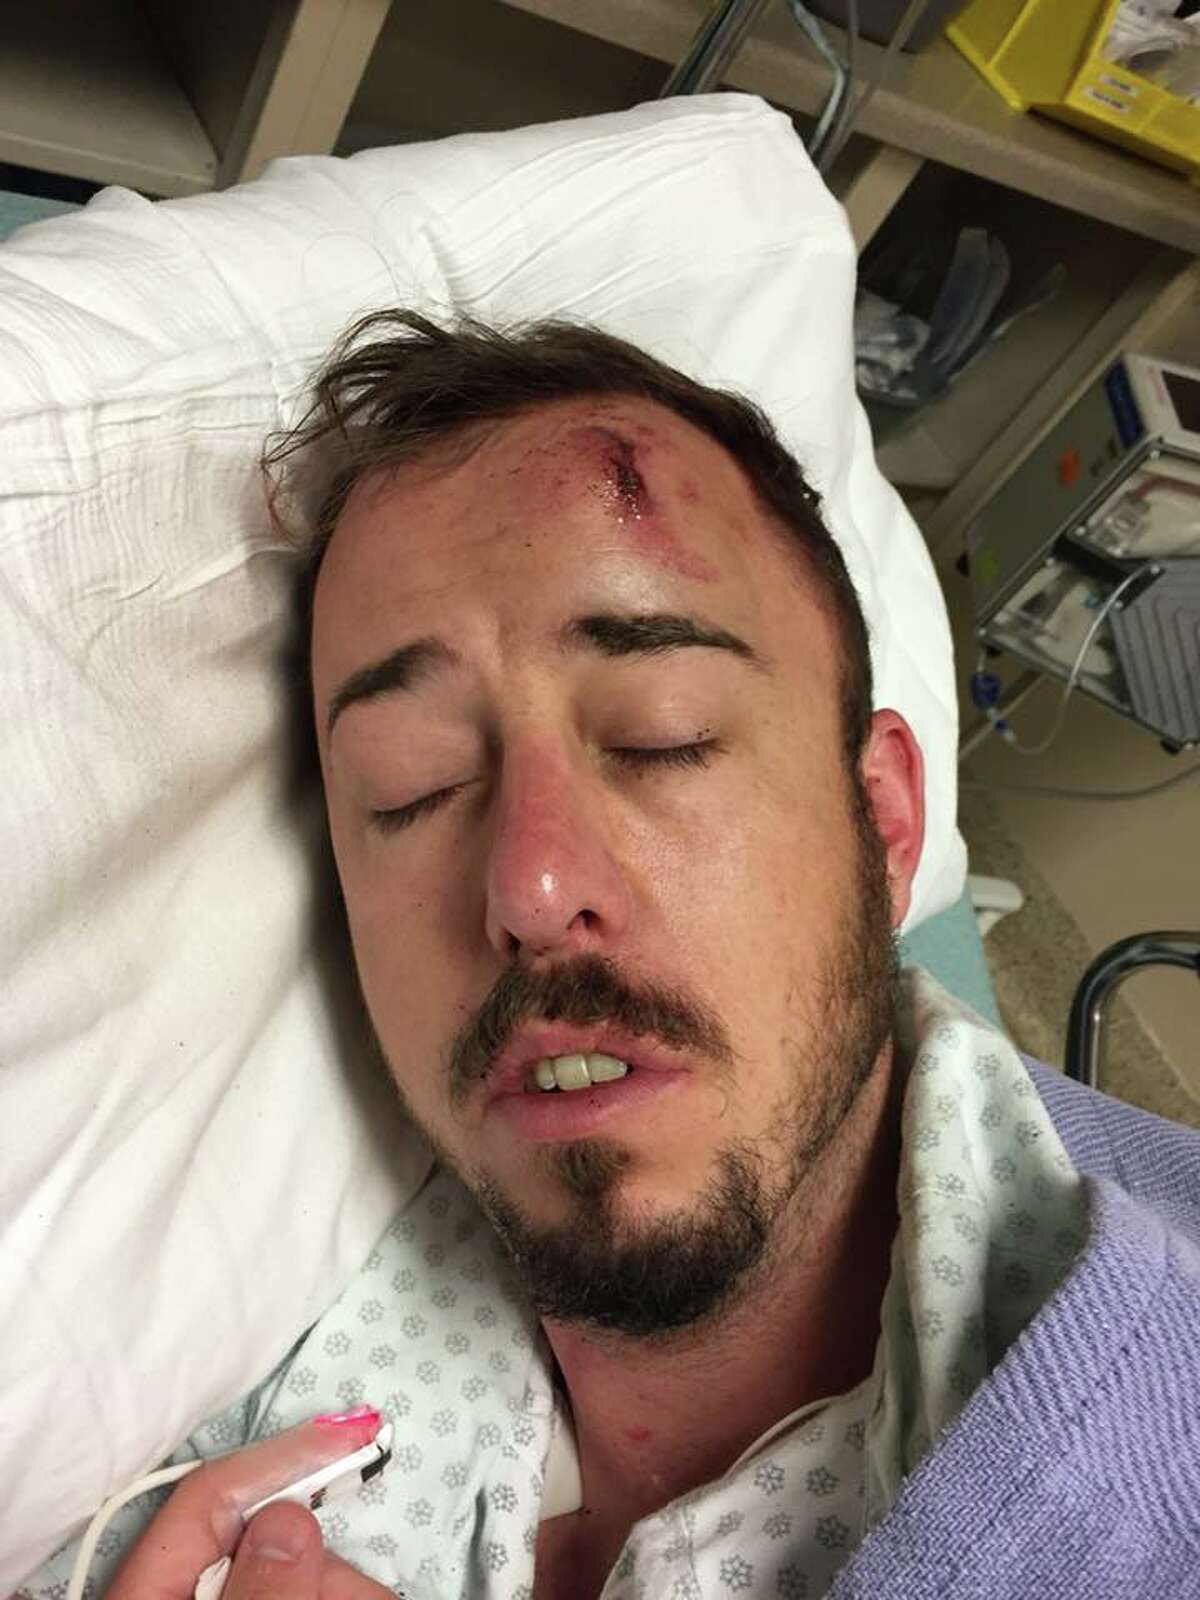 Christopher Bradford said three men attacked him as he was leaving a gay bar in Montrose early Wednesday. Continue clicking to see notable Texas crimes in 2018.